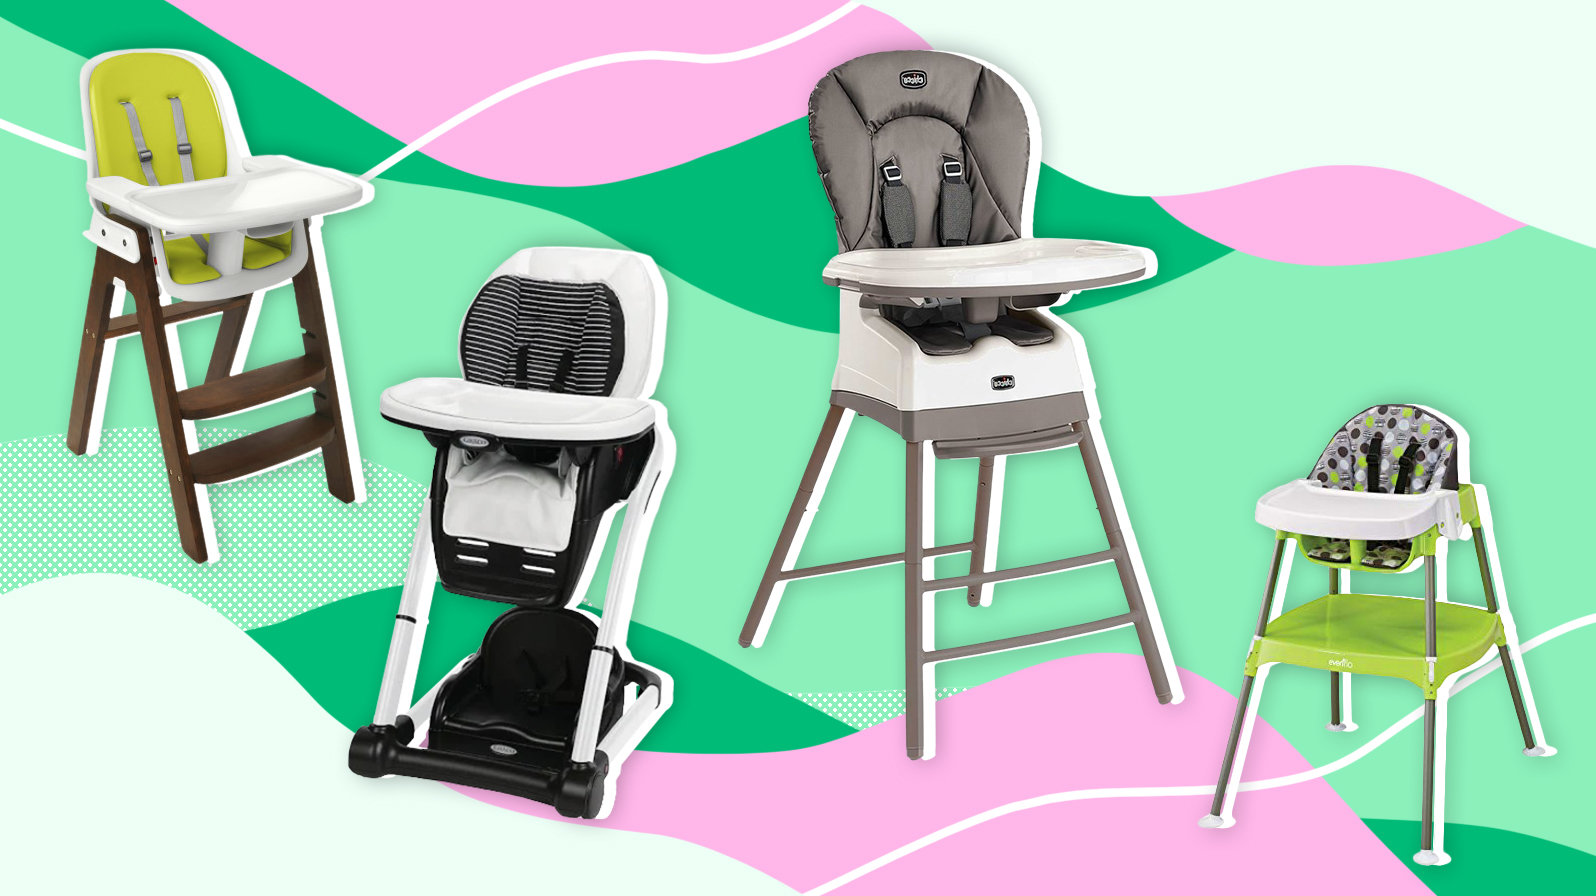 personalised chairs for toddlers